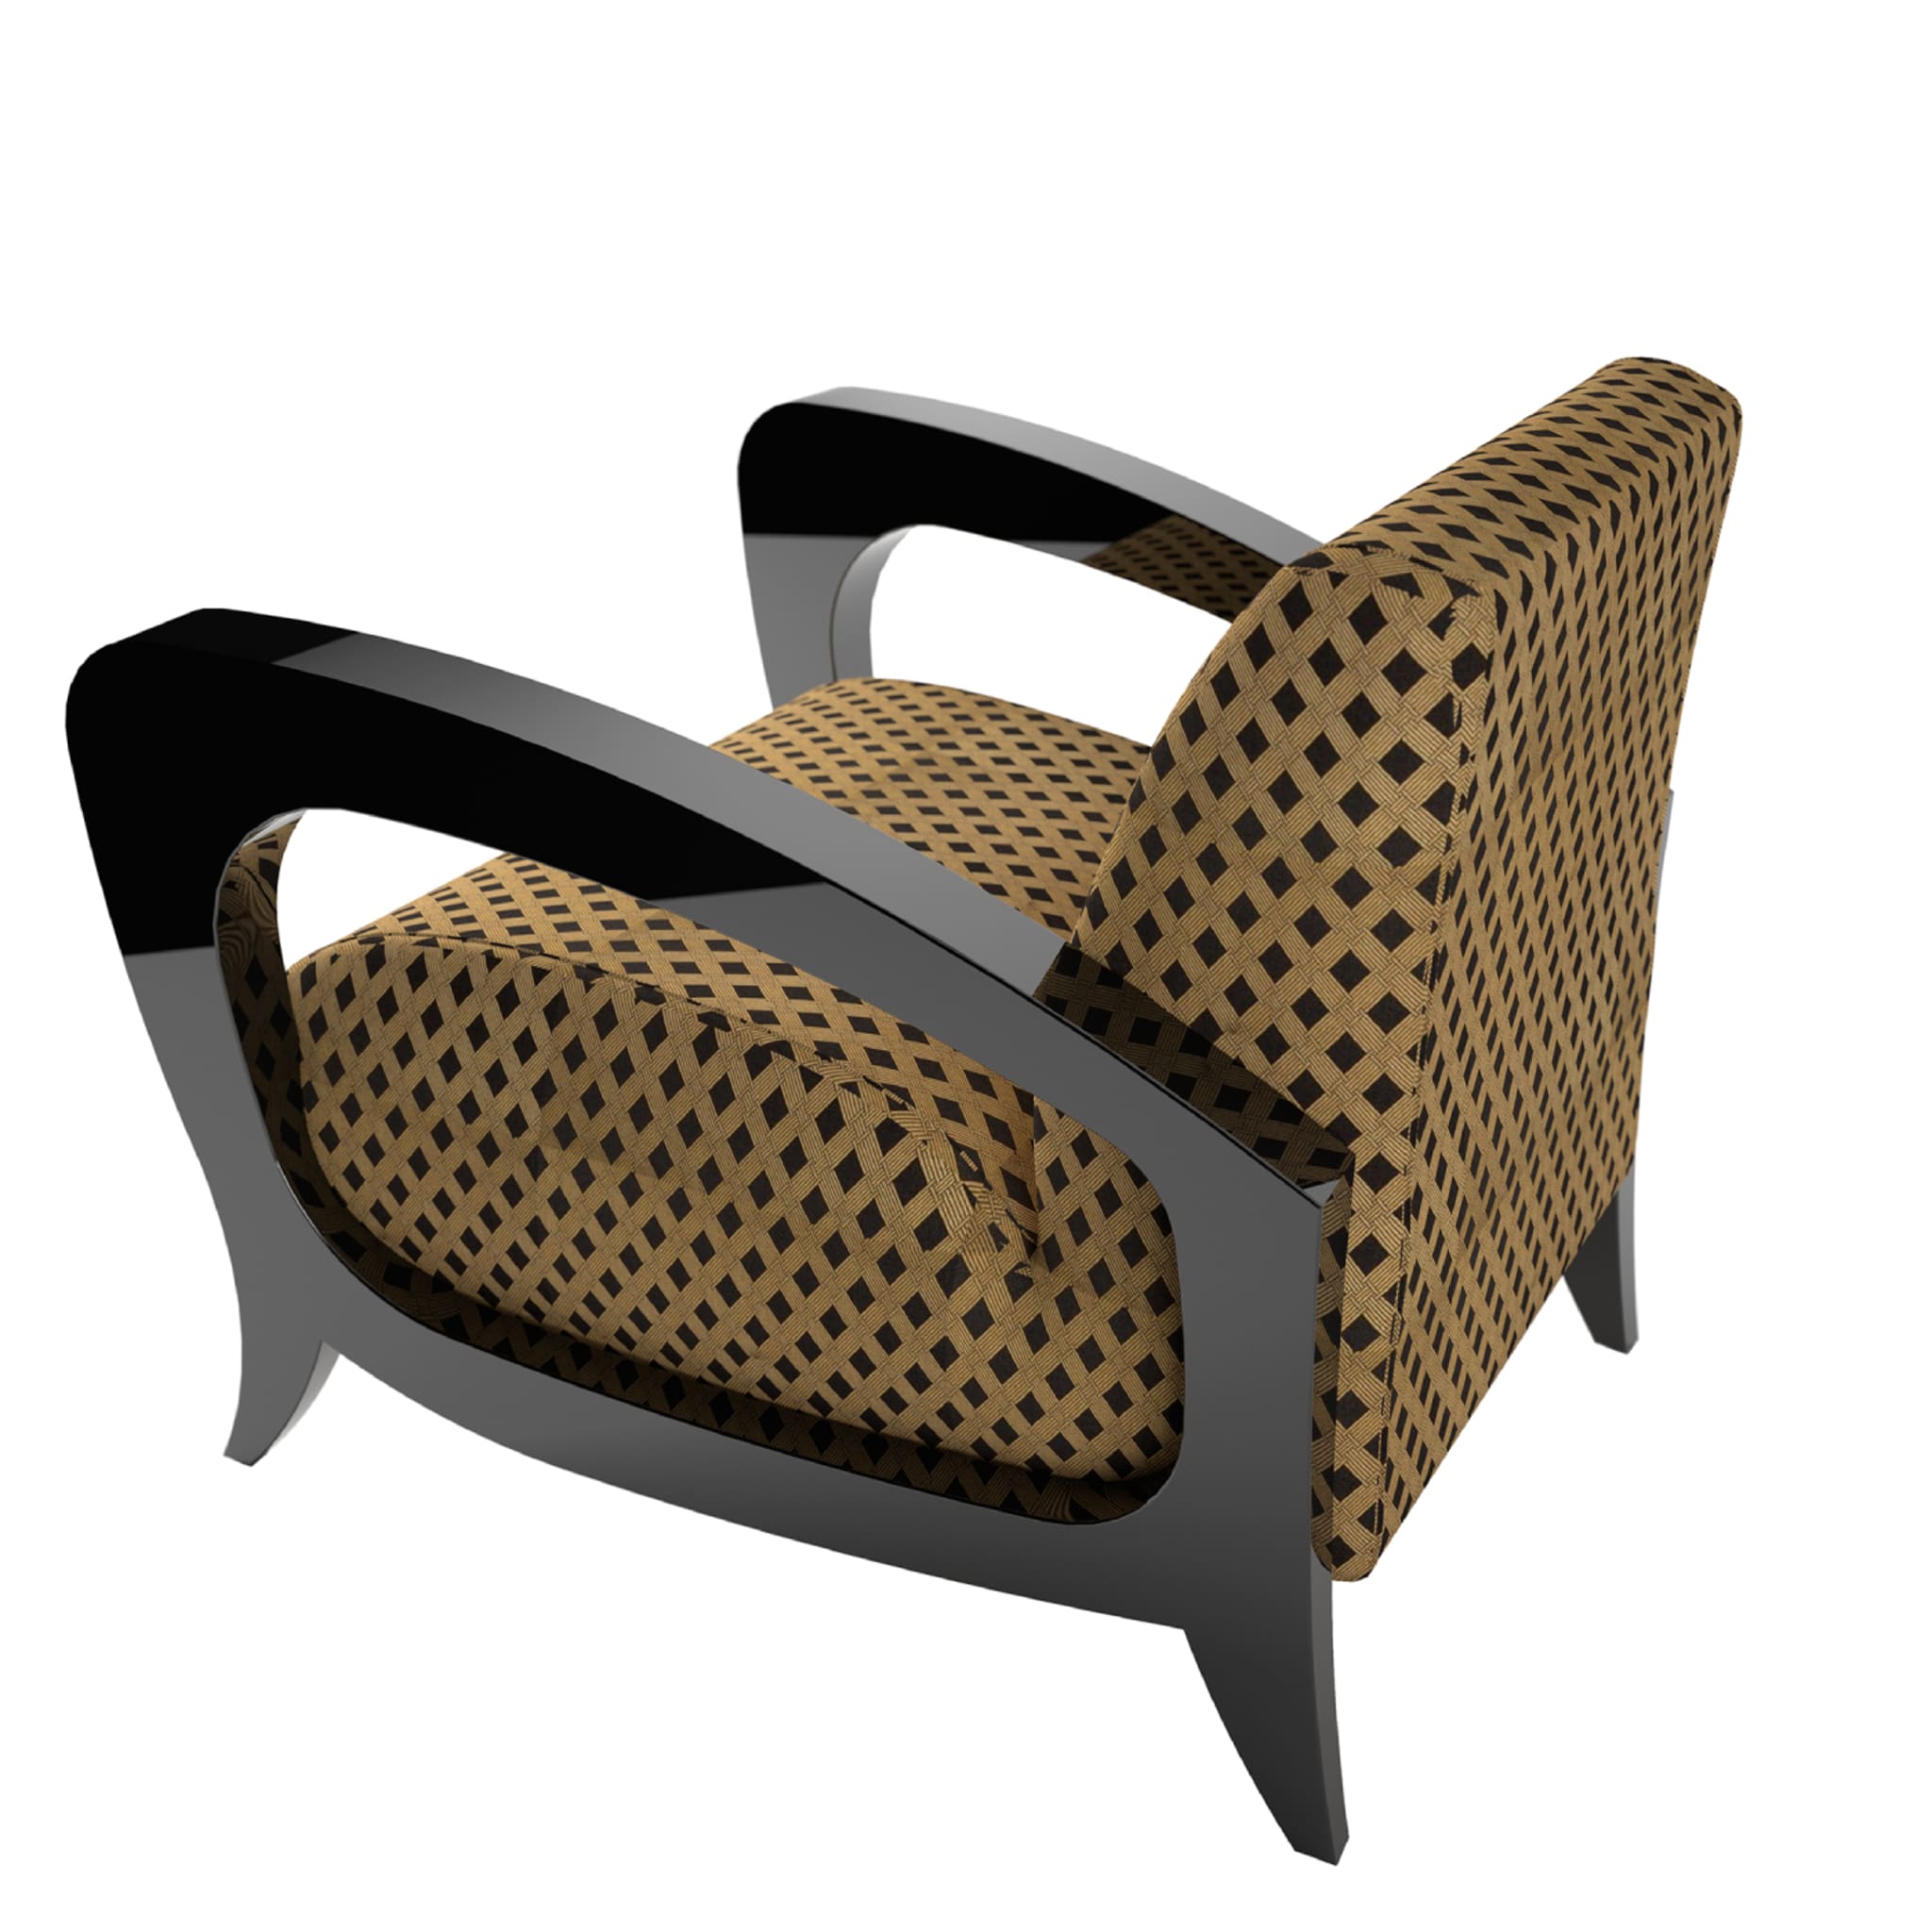 Shelly Black and Yellow Armchair by Giannella Ventura - Alternative view 2